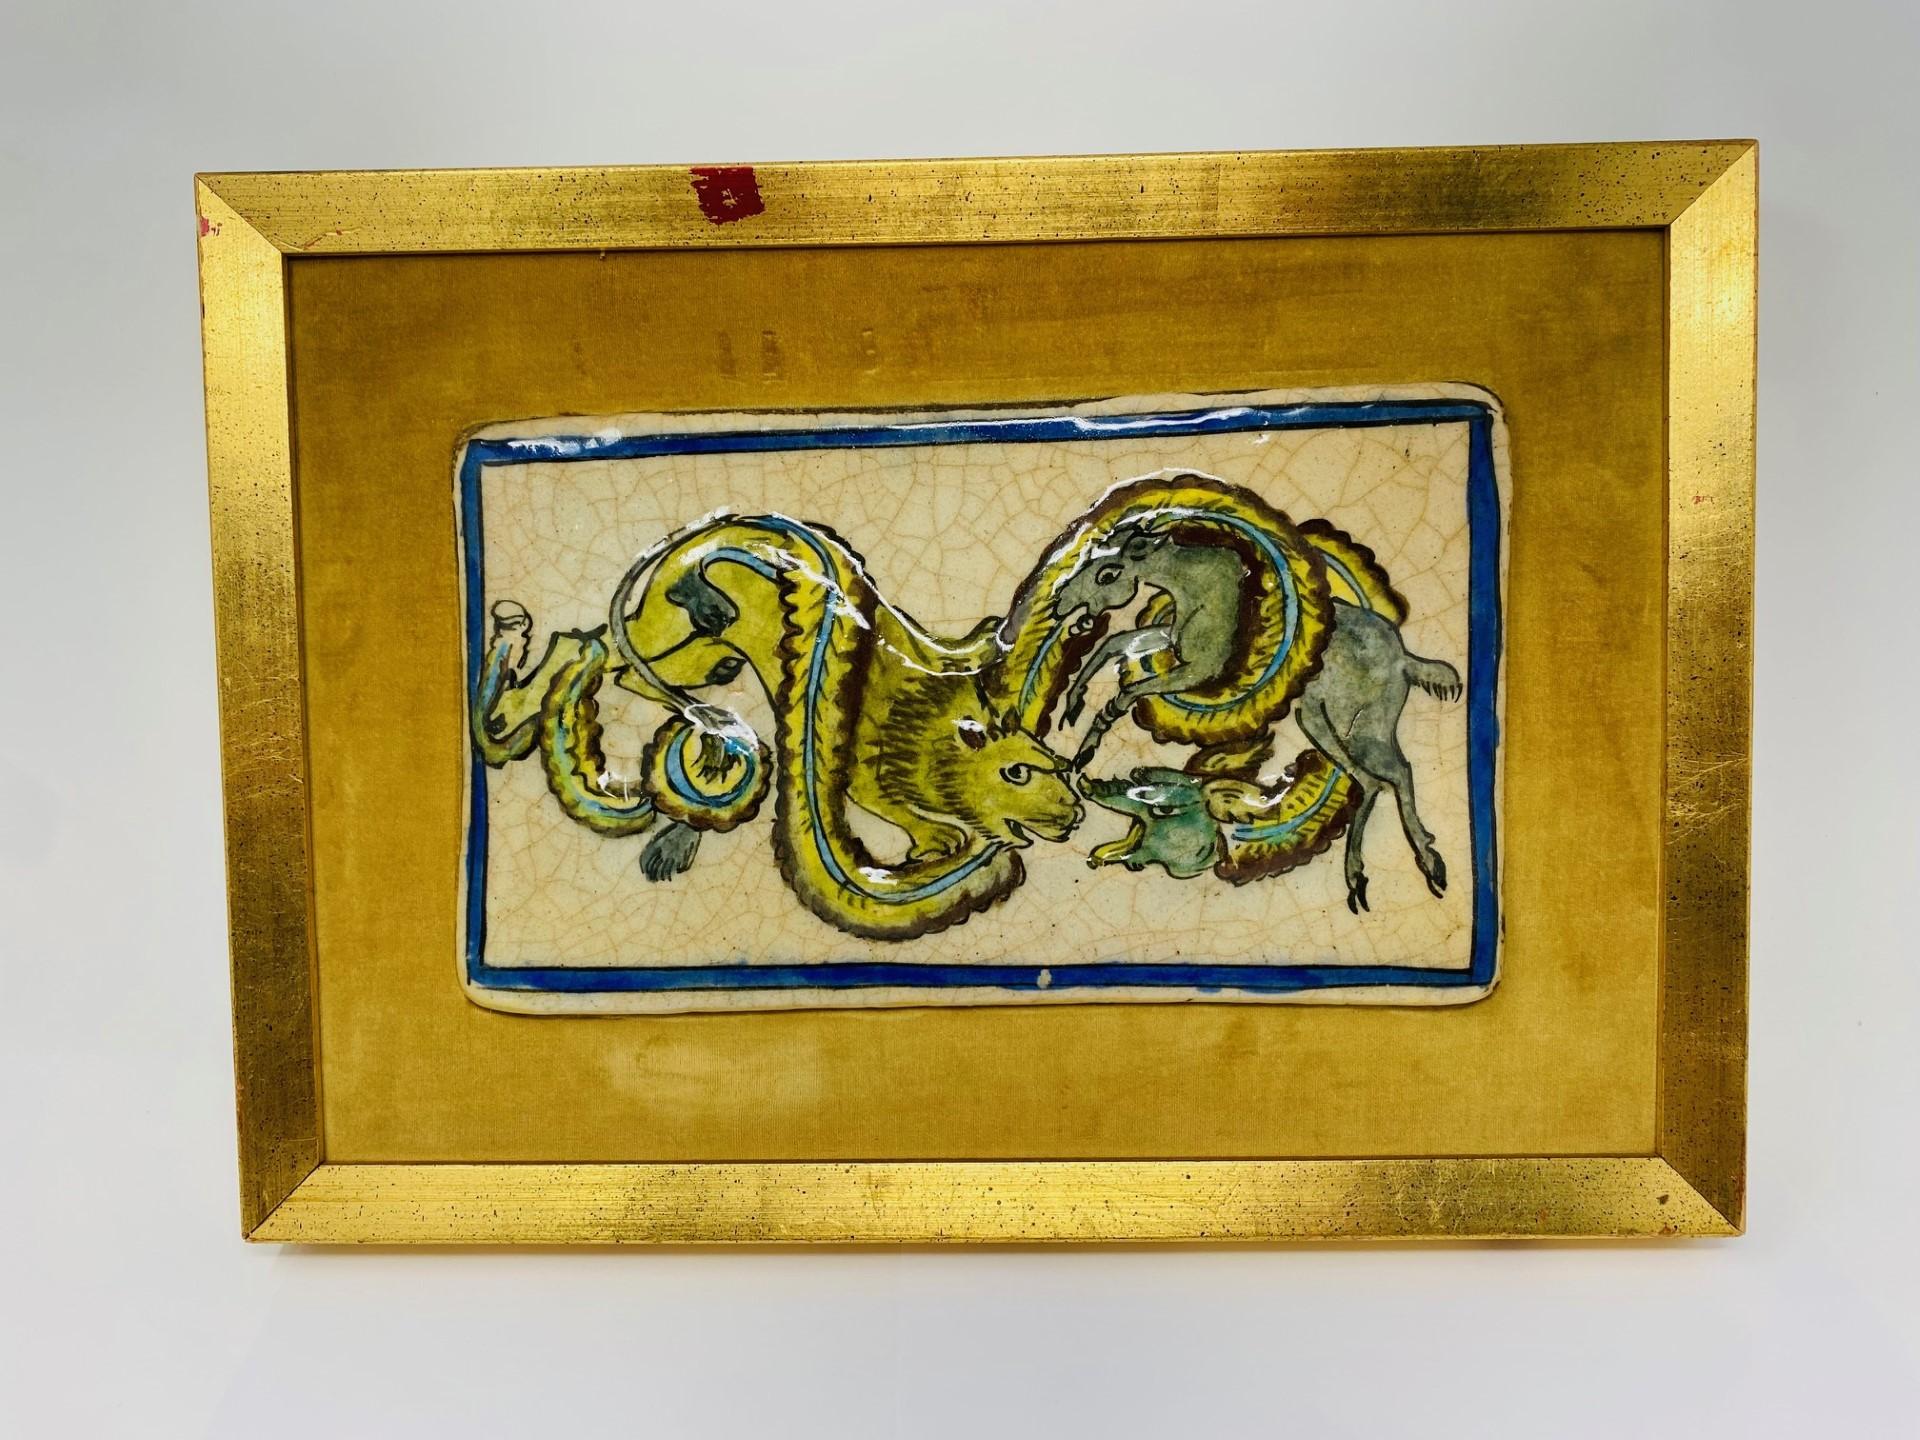 Vintage Chinoiserie Framed Ceramic Art Tile 1960s In Good Condition For Sale In San Diego, CA